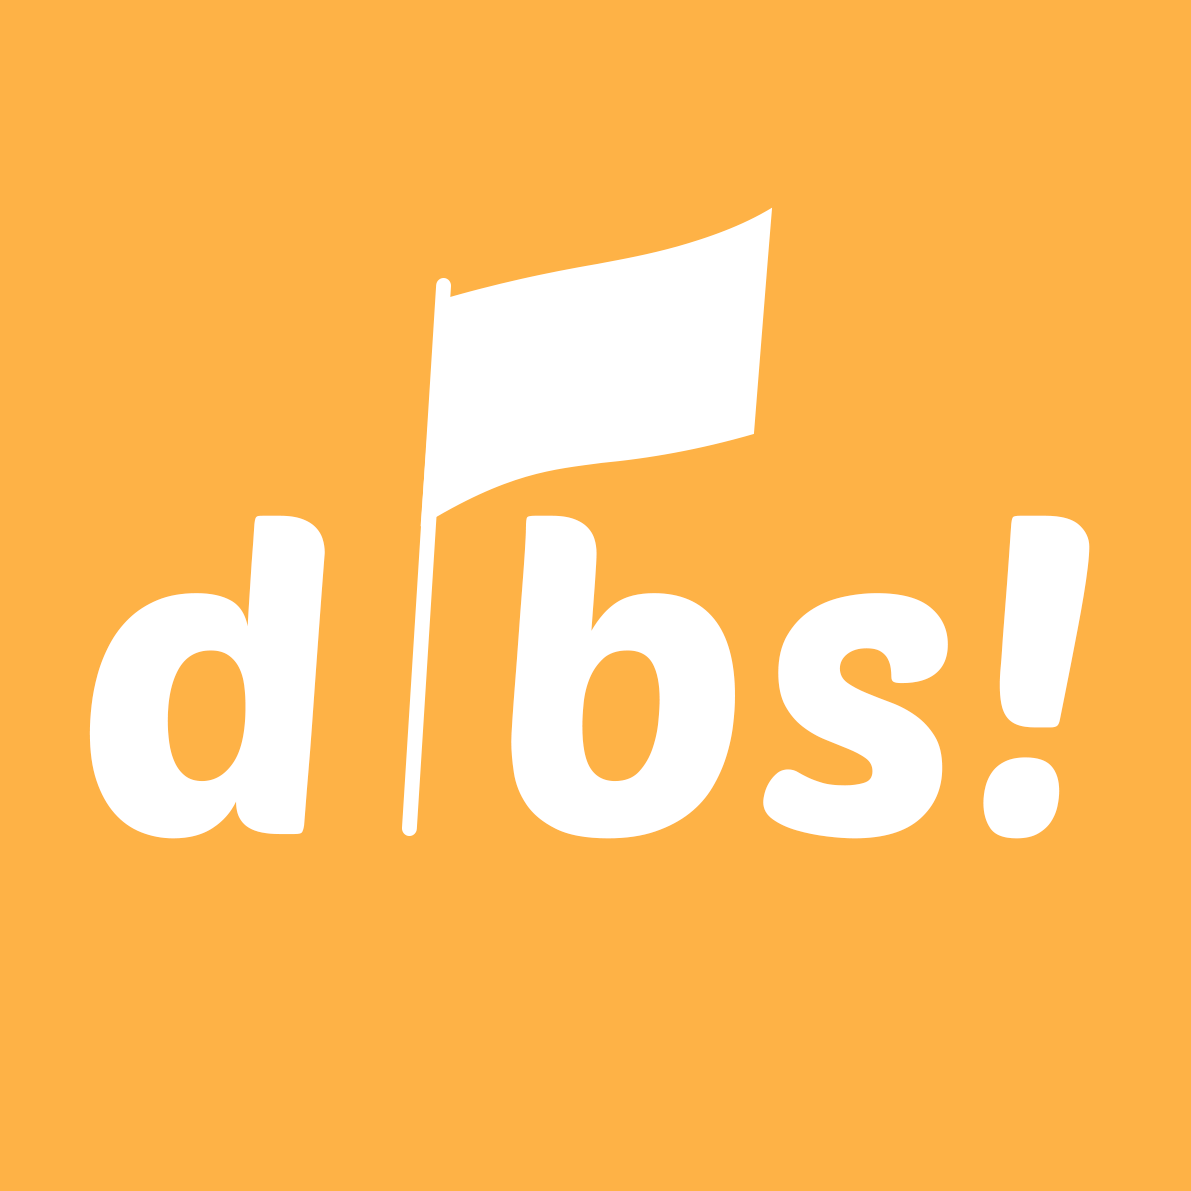 Dibs! brings real-world social interactions to your smartphone by using video as its crux. Listen and truly engage with your matches before meeting them.